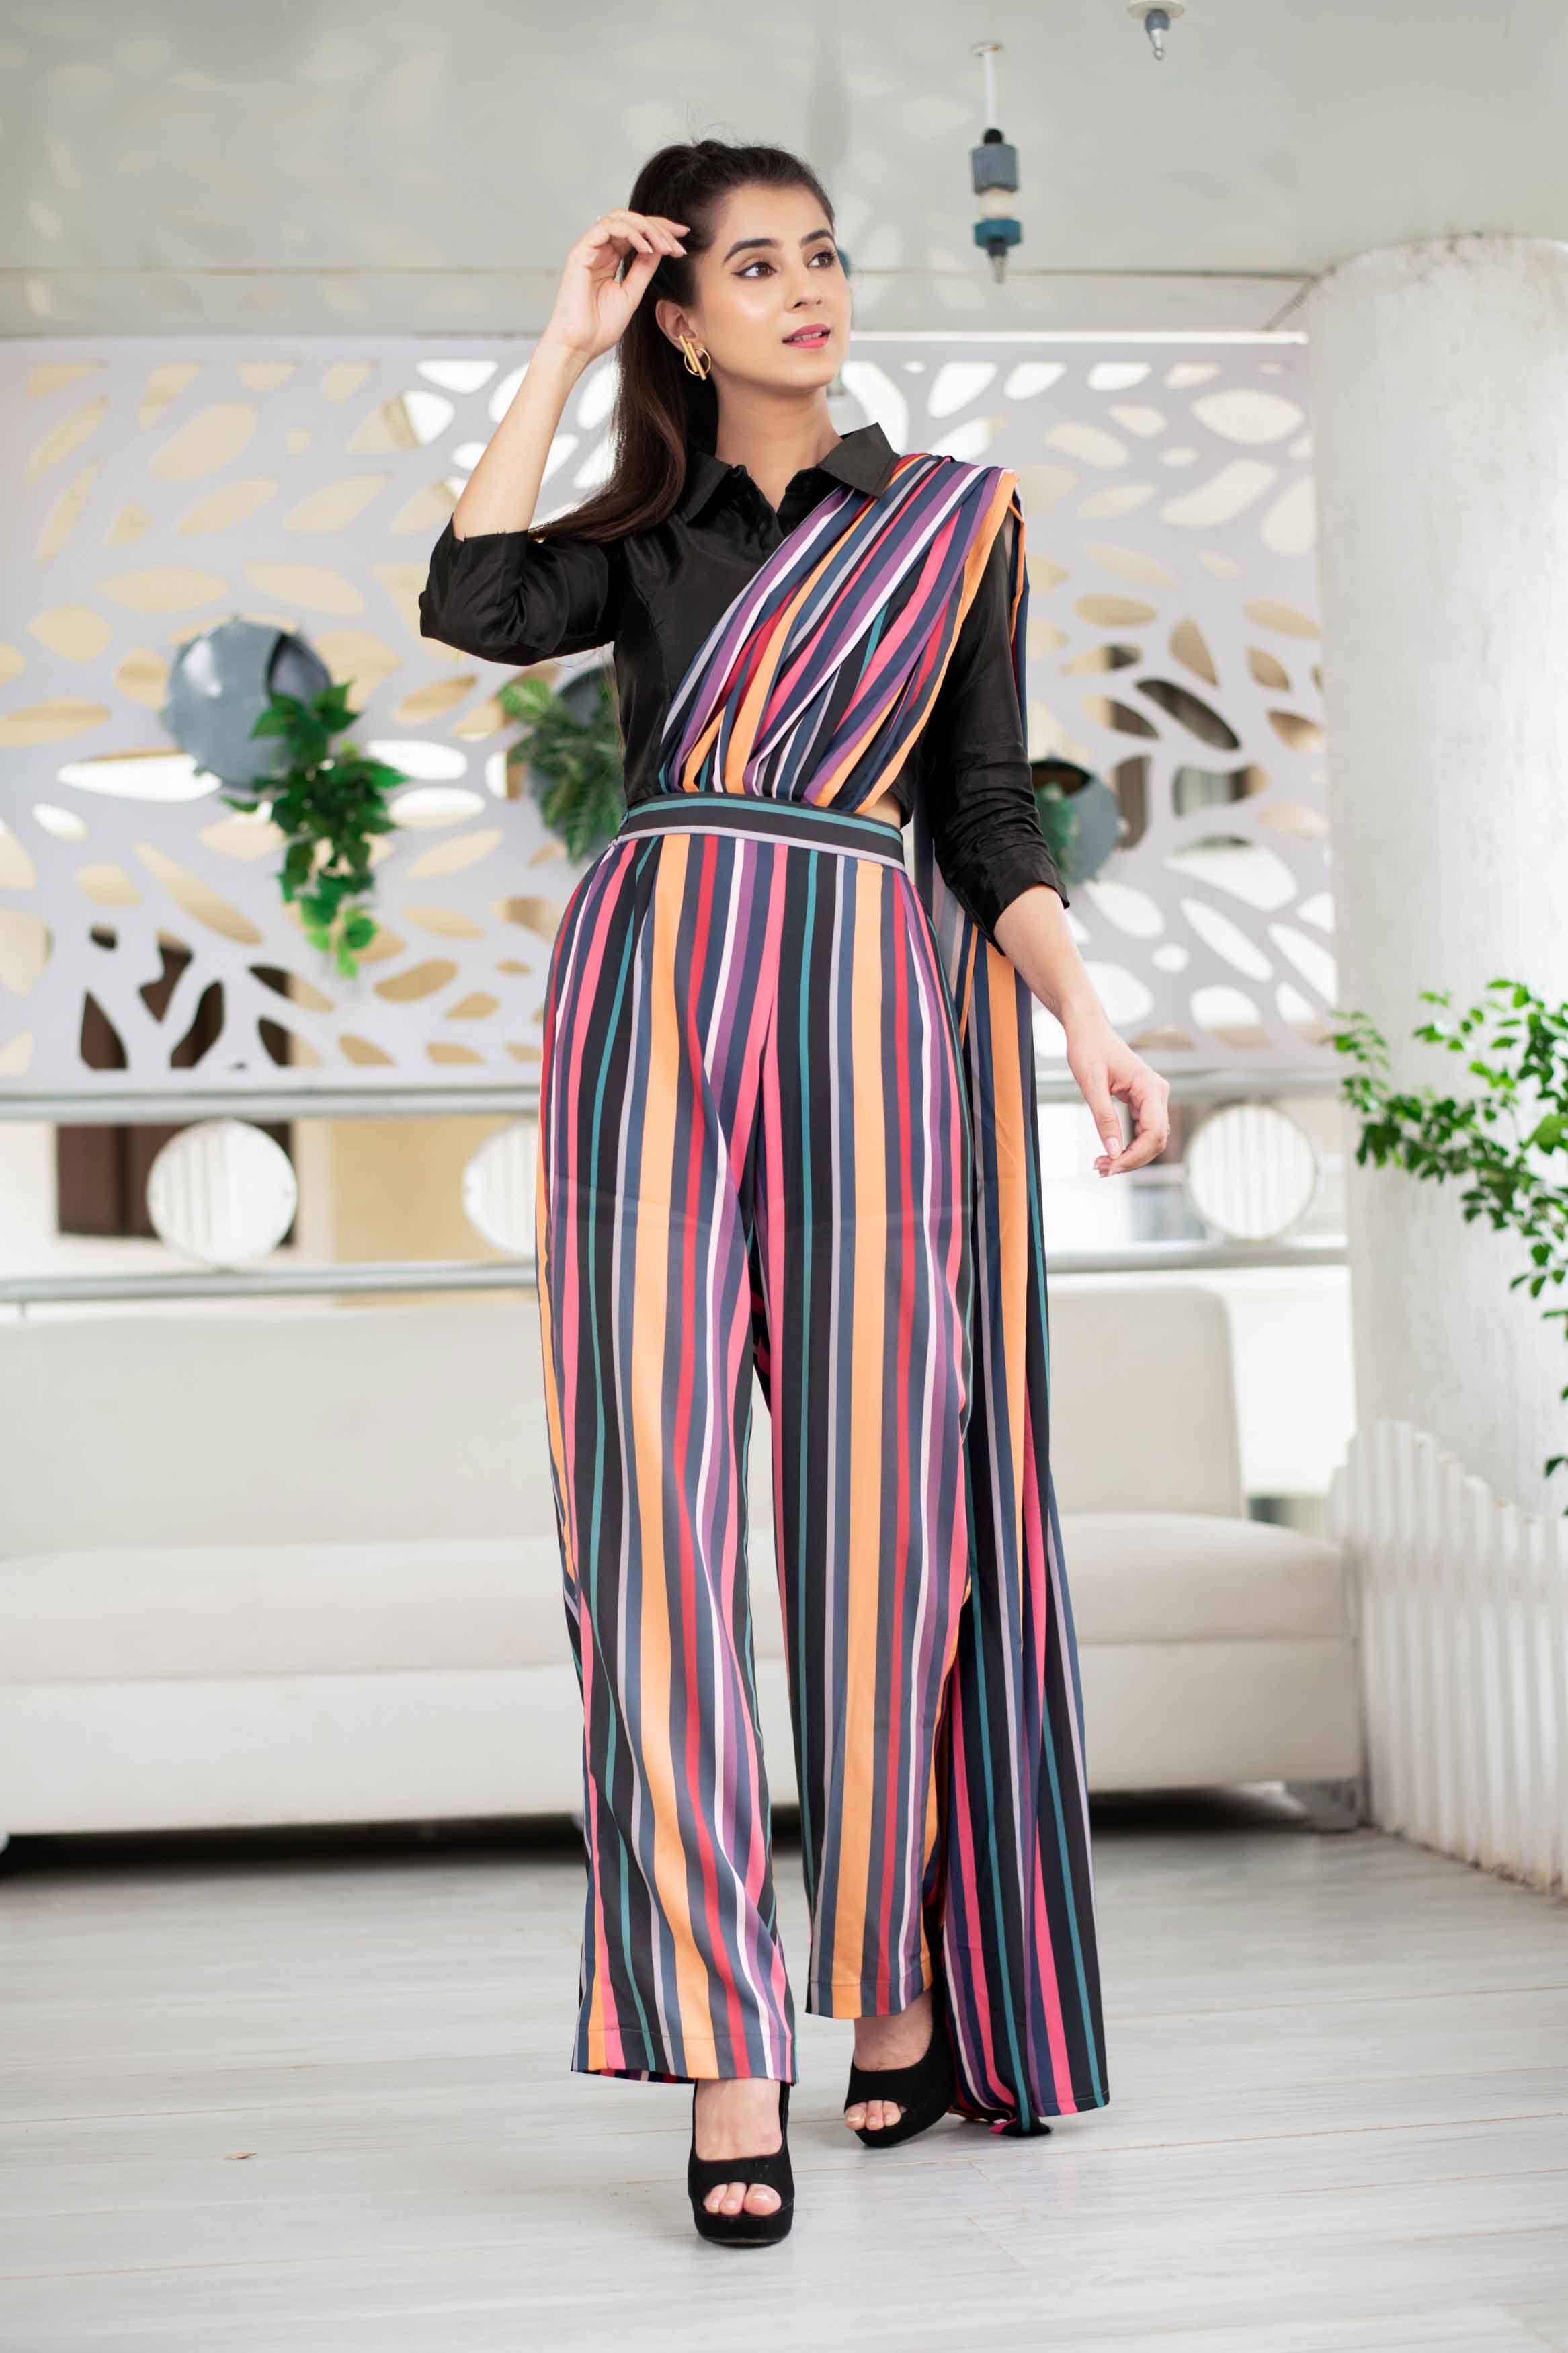 Women's Stripped Pant With Attached Dupatta And Top Set - Label Shaurya Sanadhya